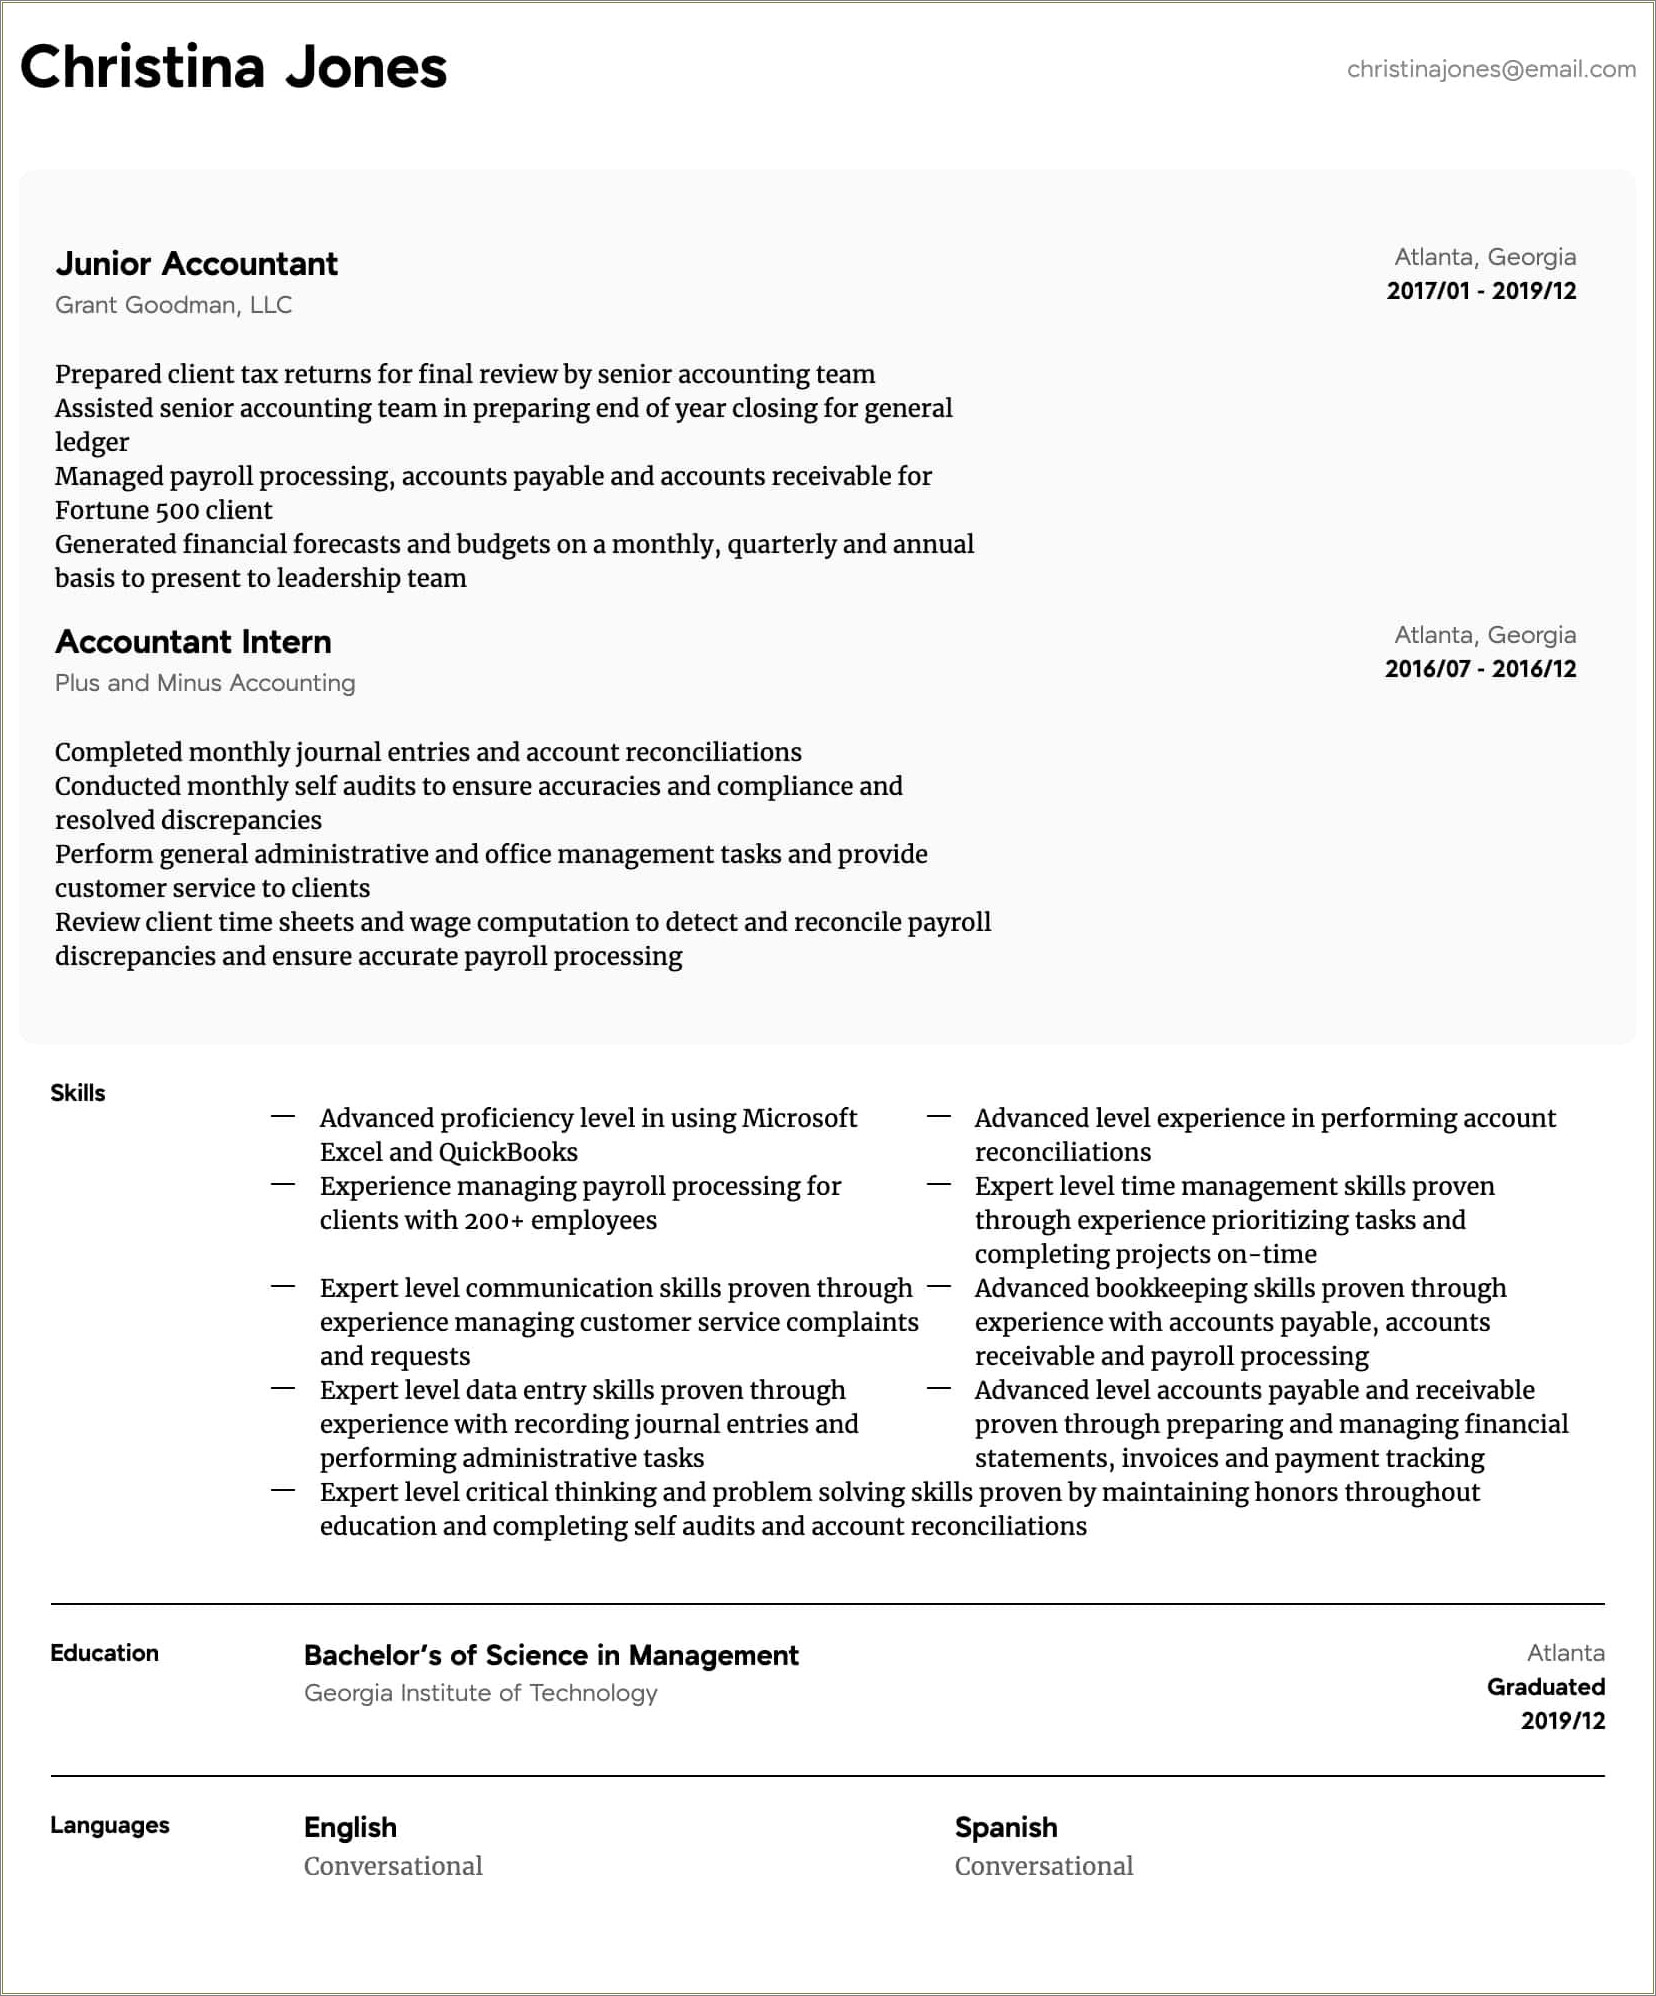 Resume For Entry Level Accounting Job